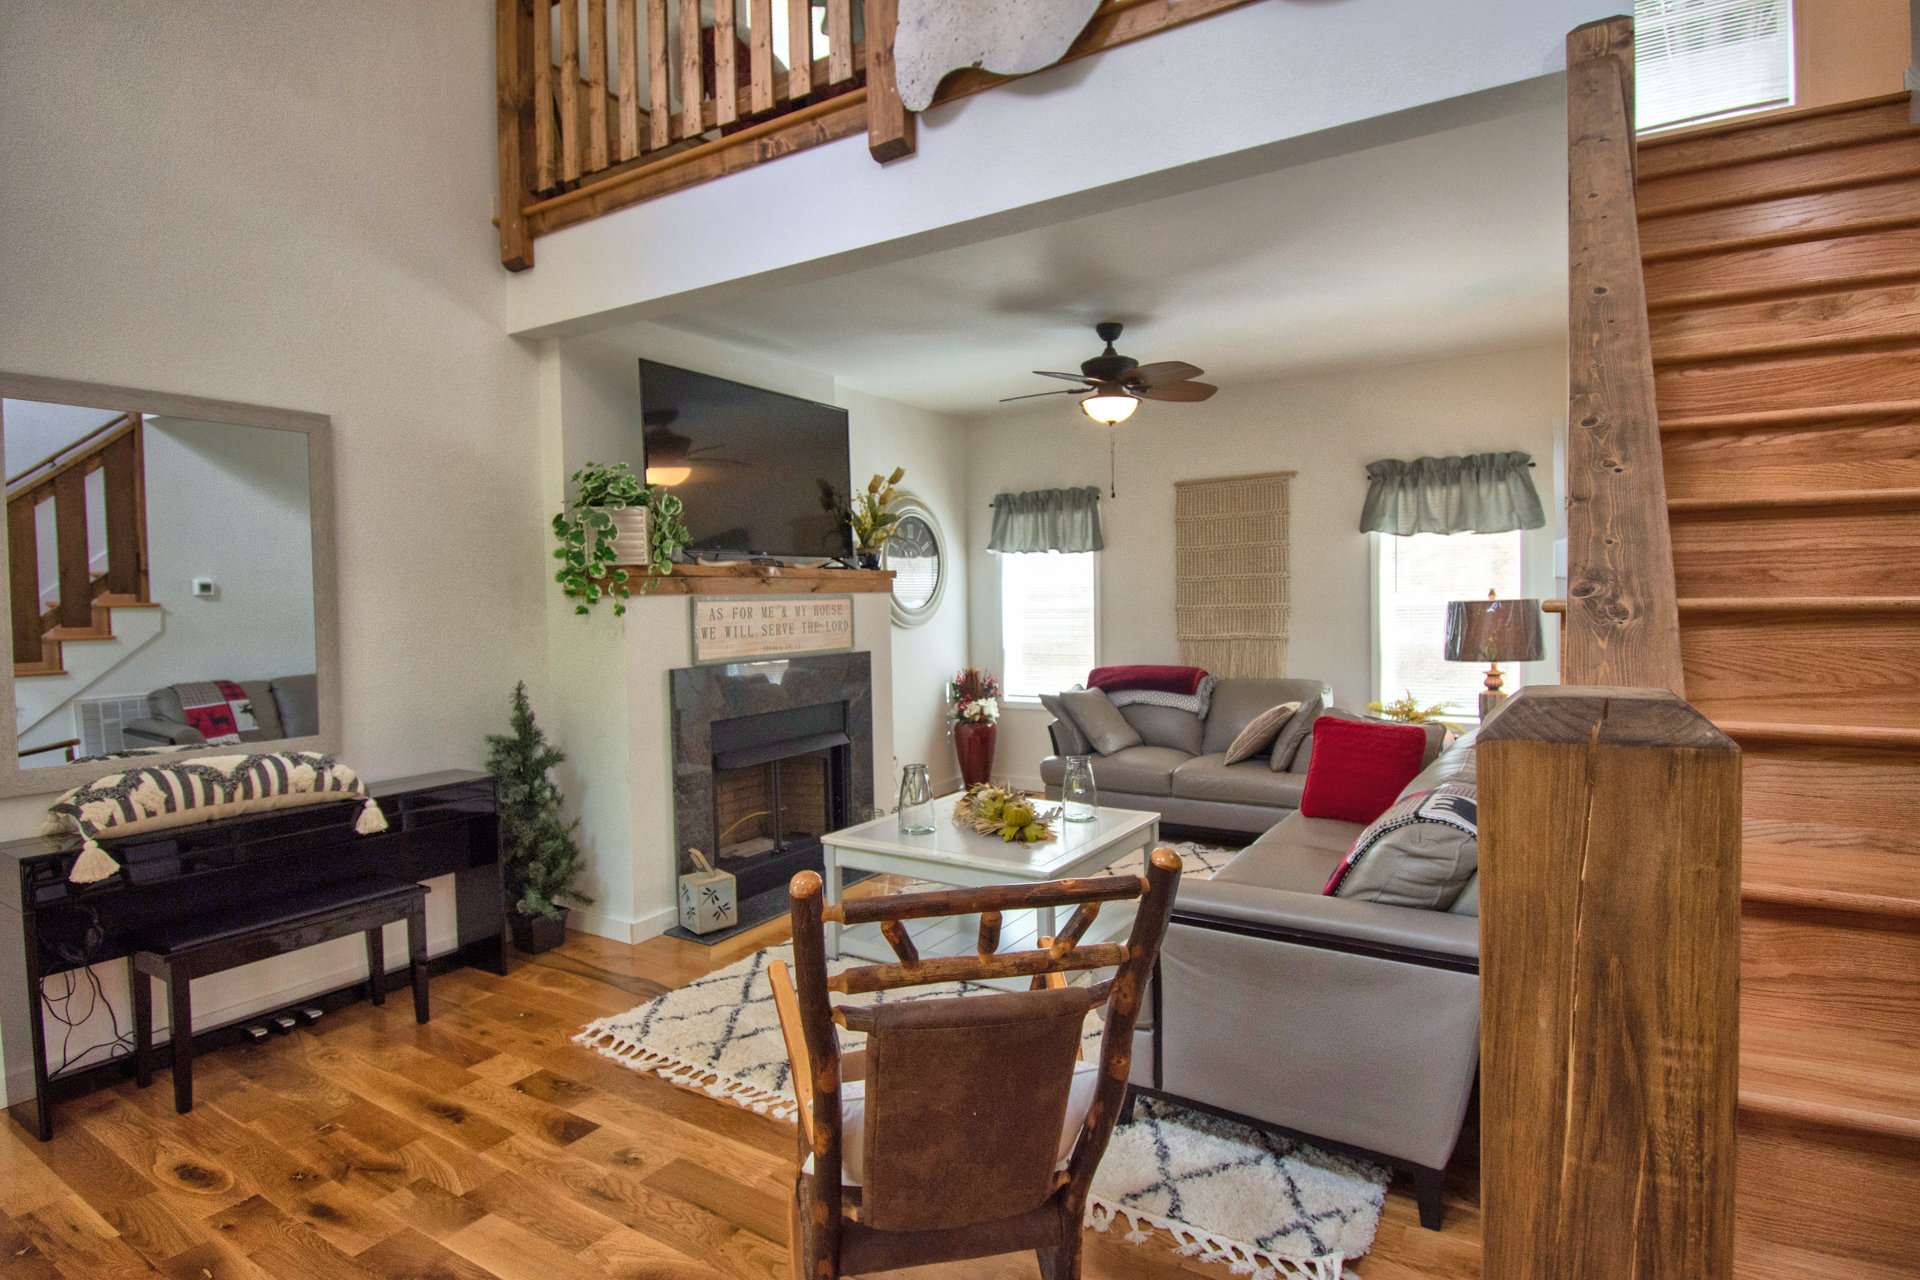 The living area is a great place to spend time with family or entertain guests.